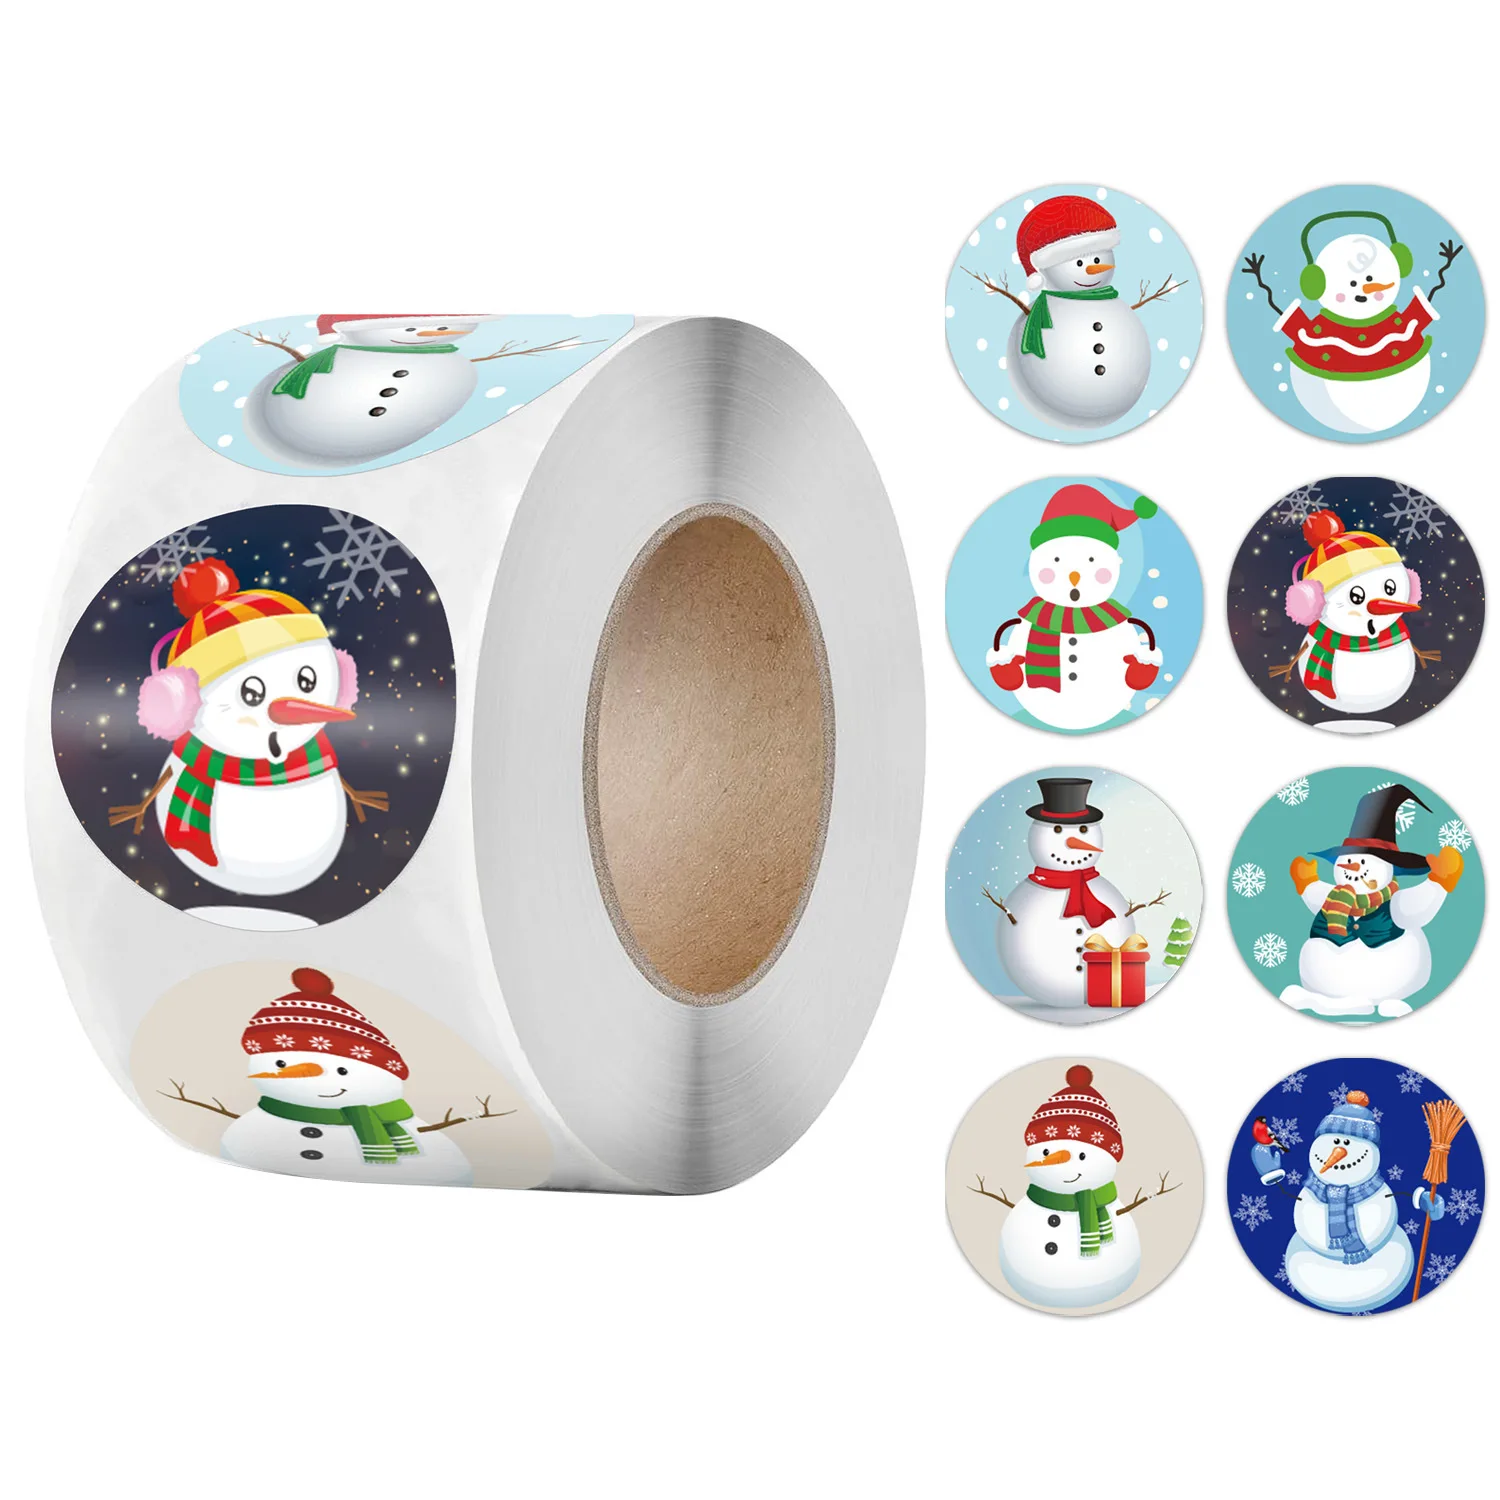 

500pcs/Roll 3.8cm/1.5inch Merry Christmas Santa Stickers For Gift Packing Winter Snowman Elk Deer Labels Xmas Decoration Home